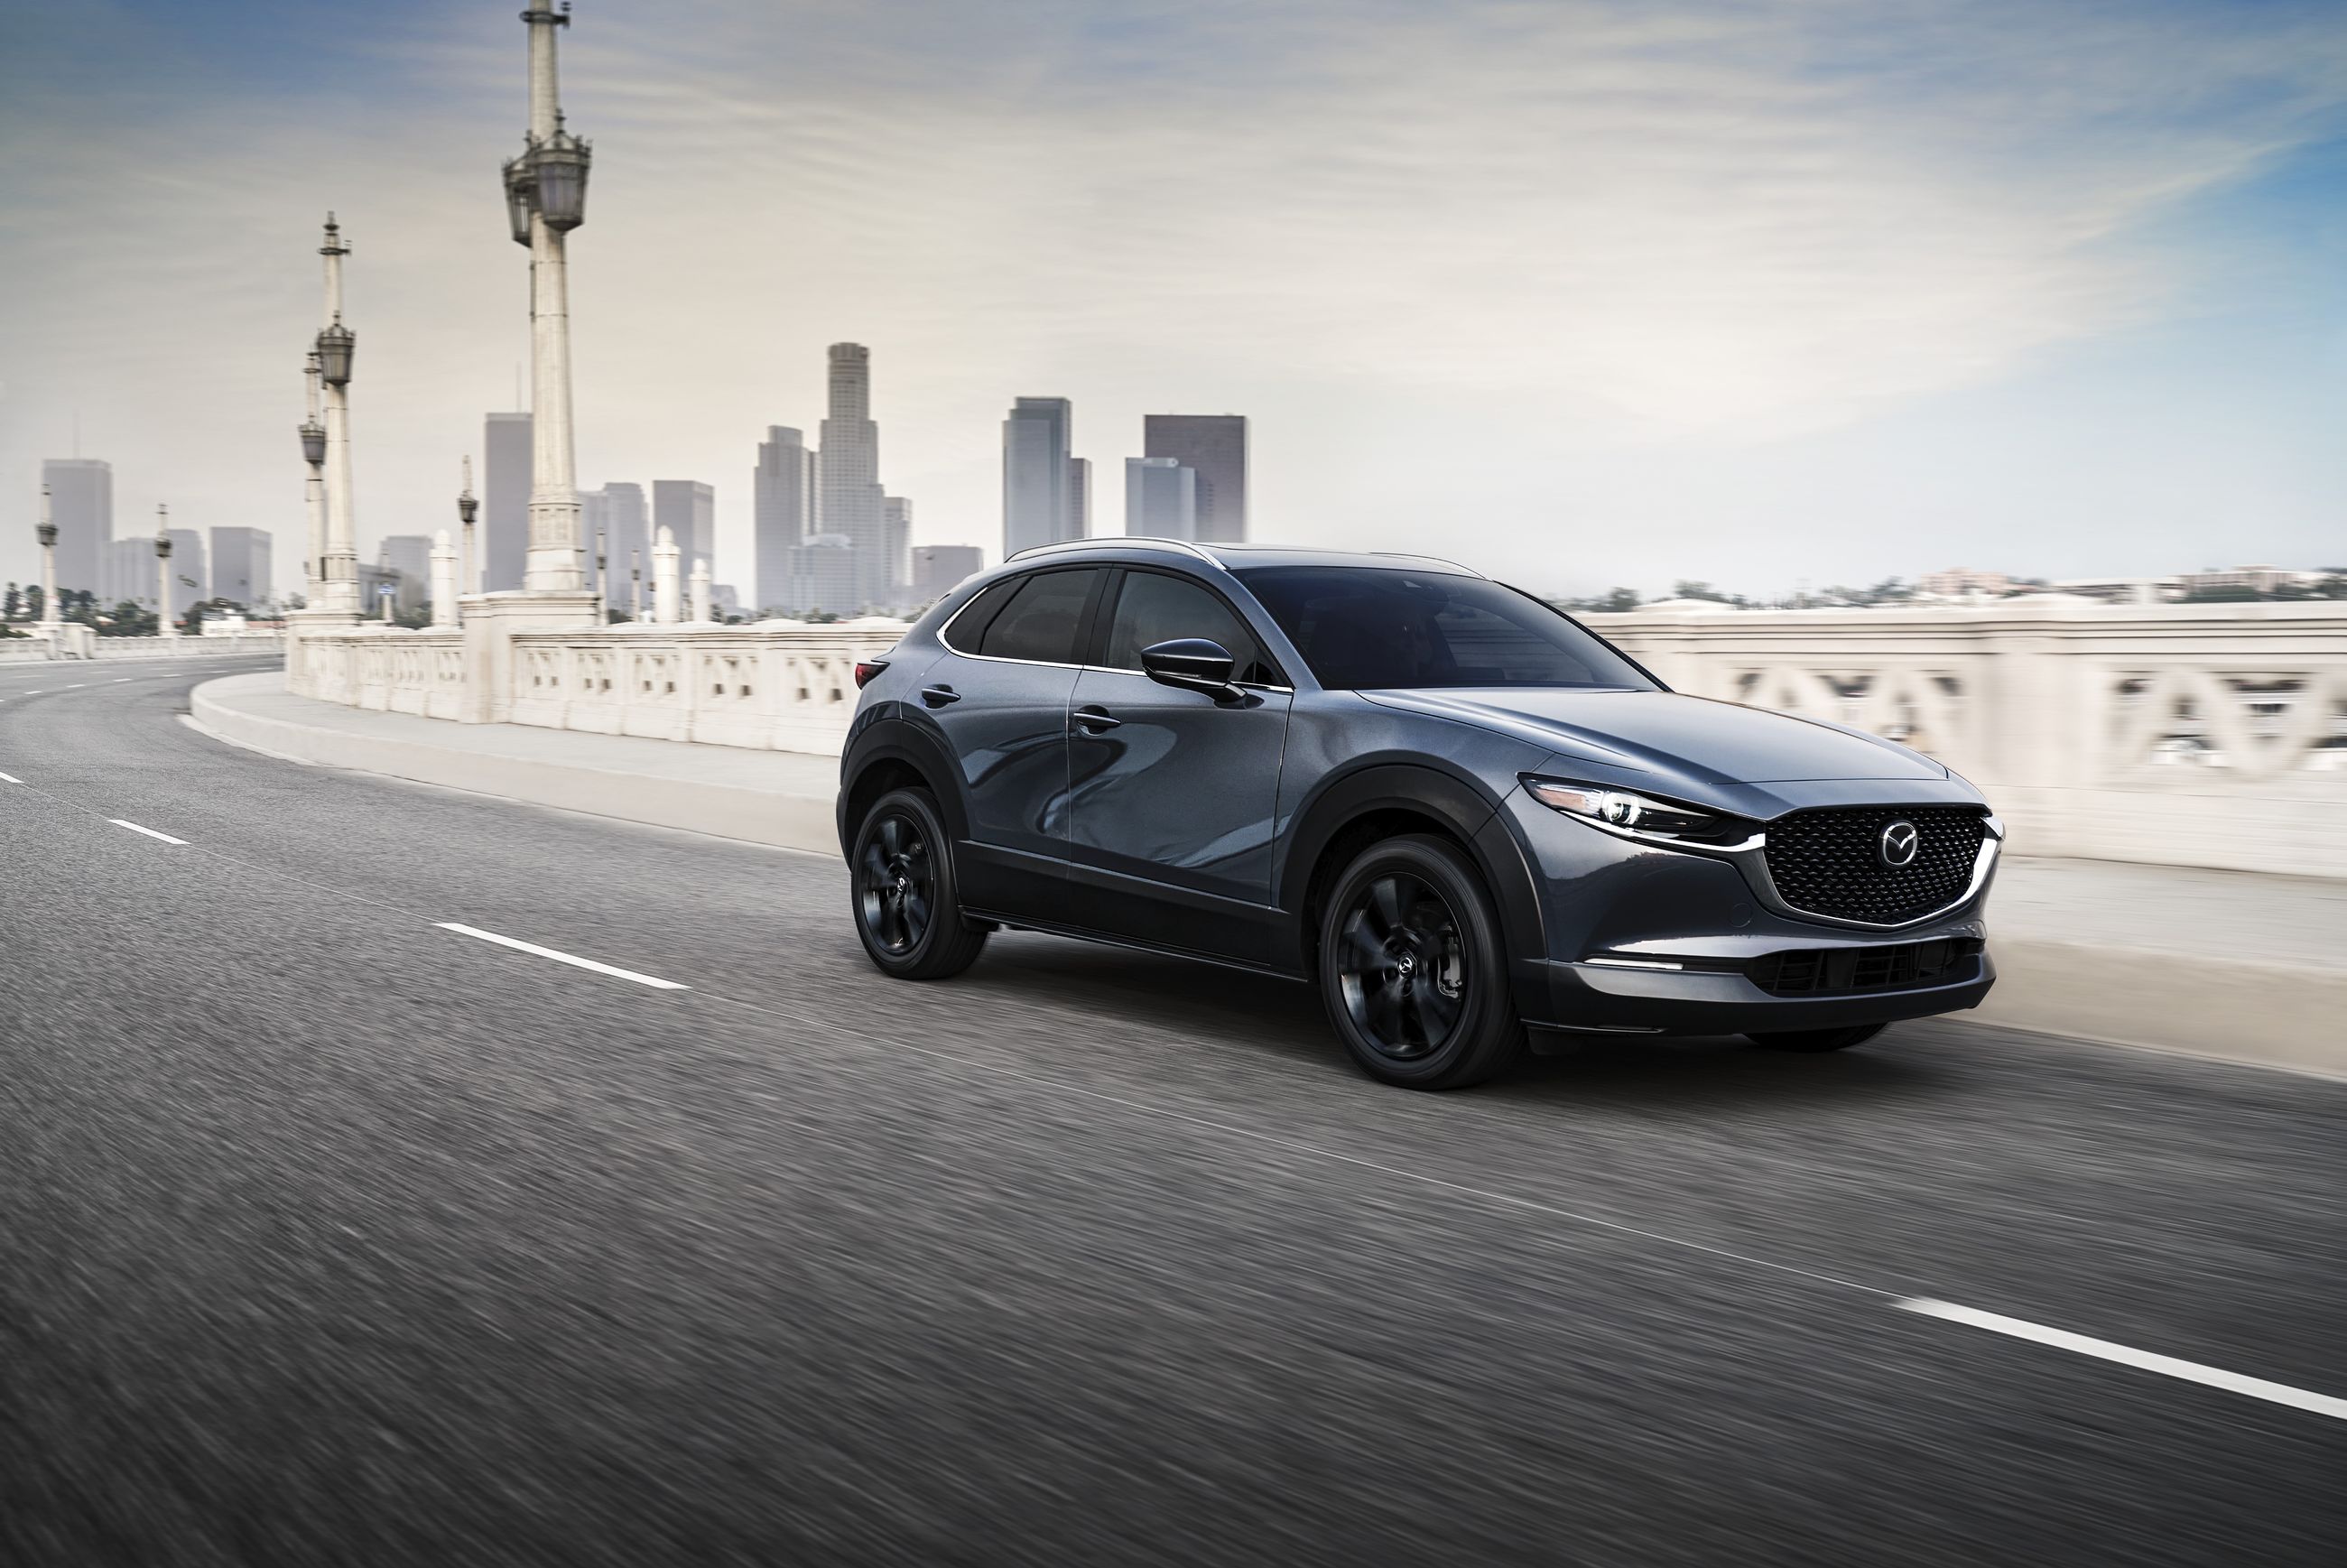 Time For Turbo: The 2021 Mazda CX-30 Will Be Available With The Skyactiv-G 2.5 Turbo